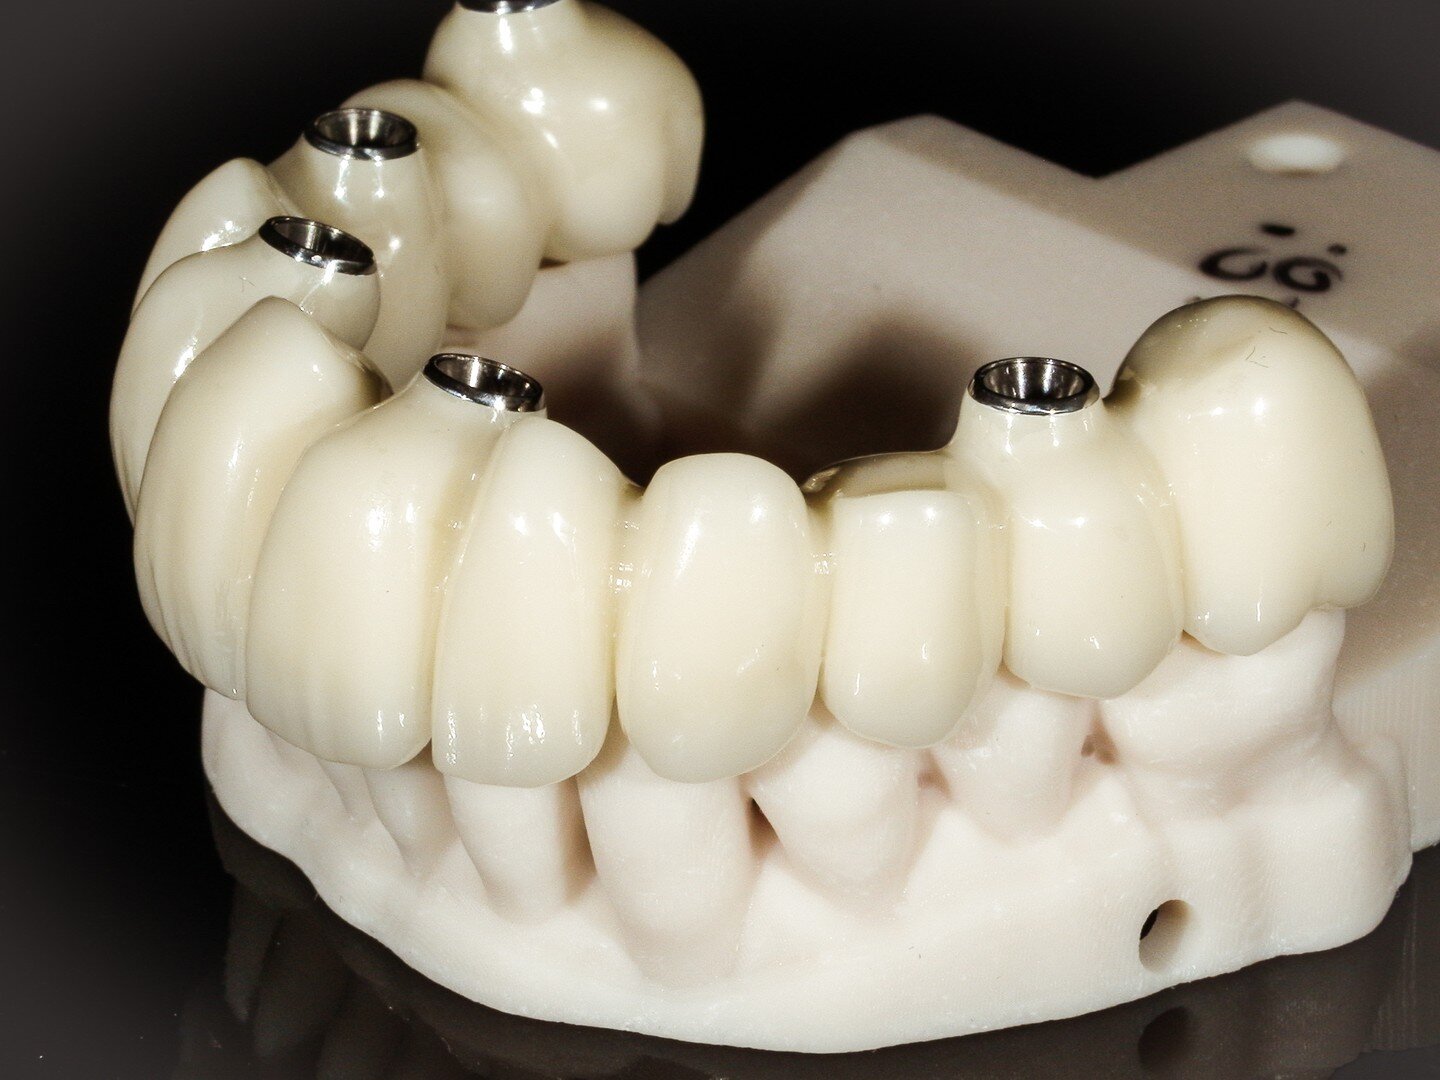 This type of case is life-changing.  The surgeon chose to use five Straumann implants with SRAs.  These SRAs draw from multiple angles allowing multiple units to seat without binding.